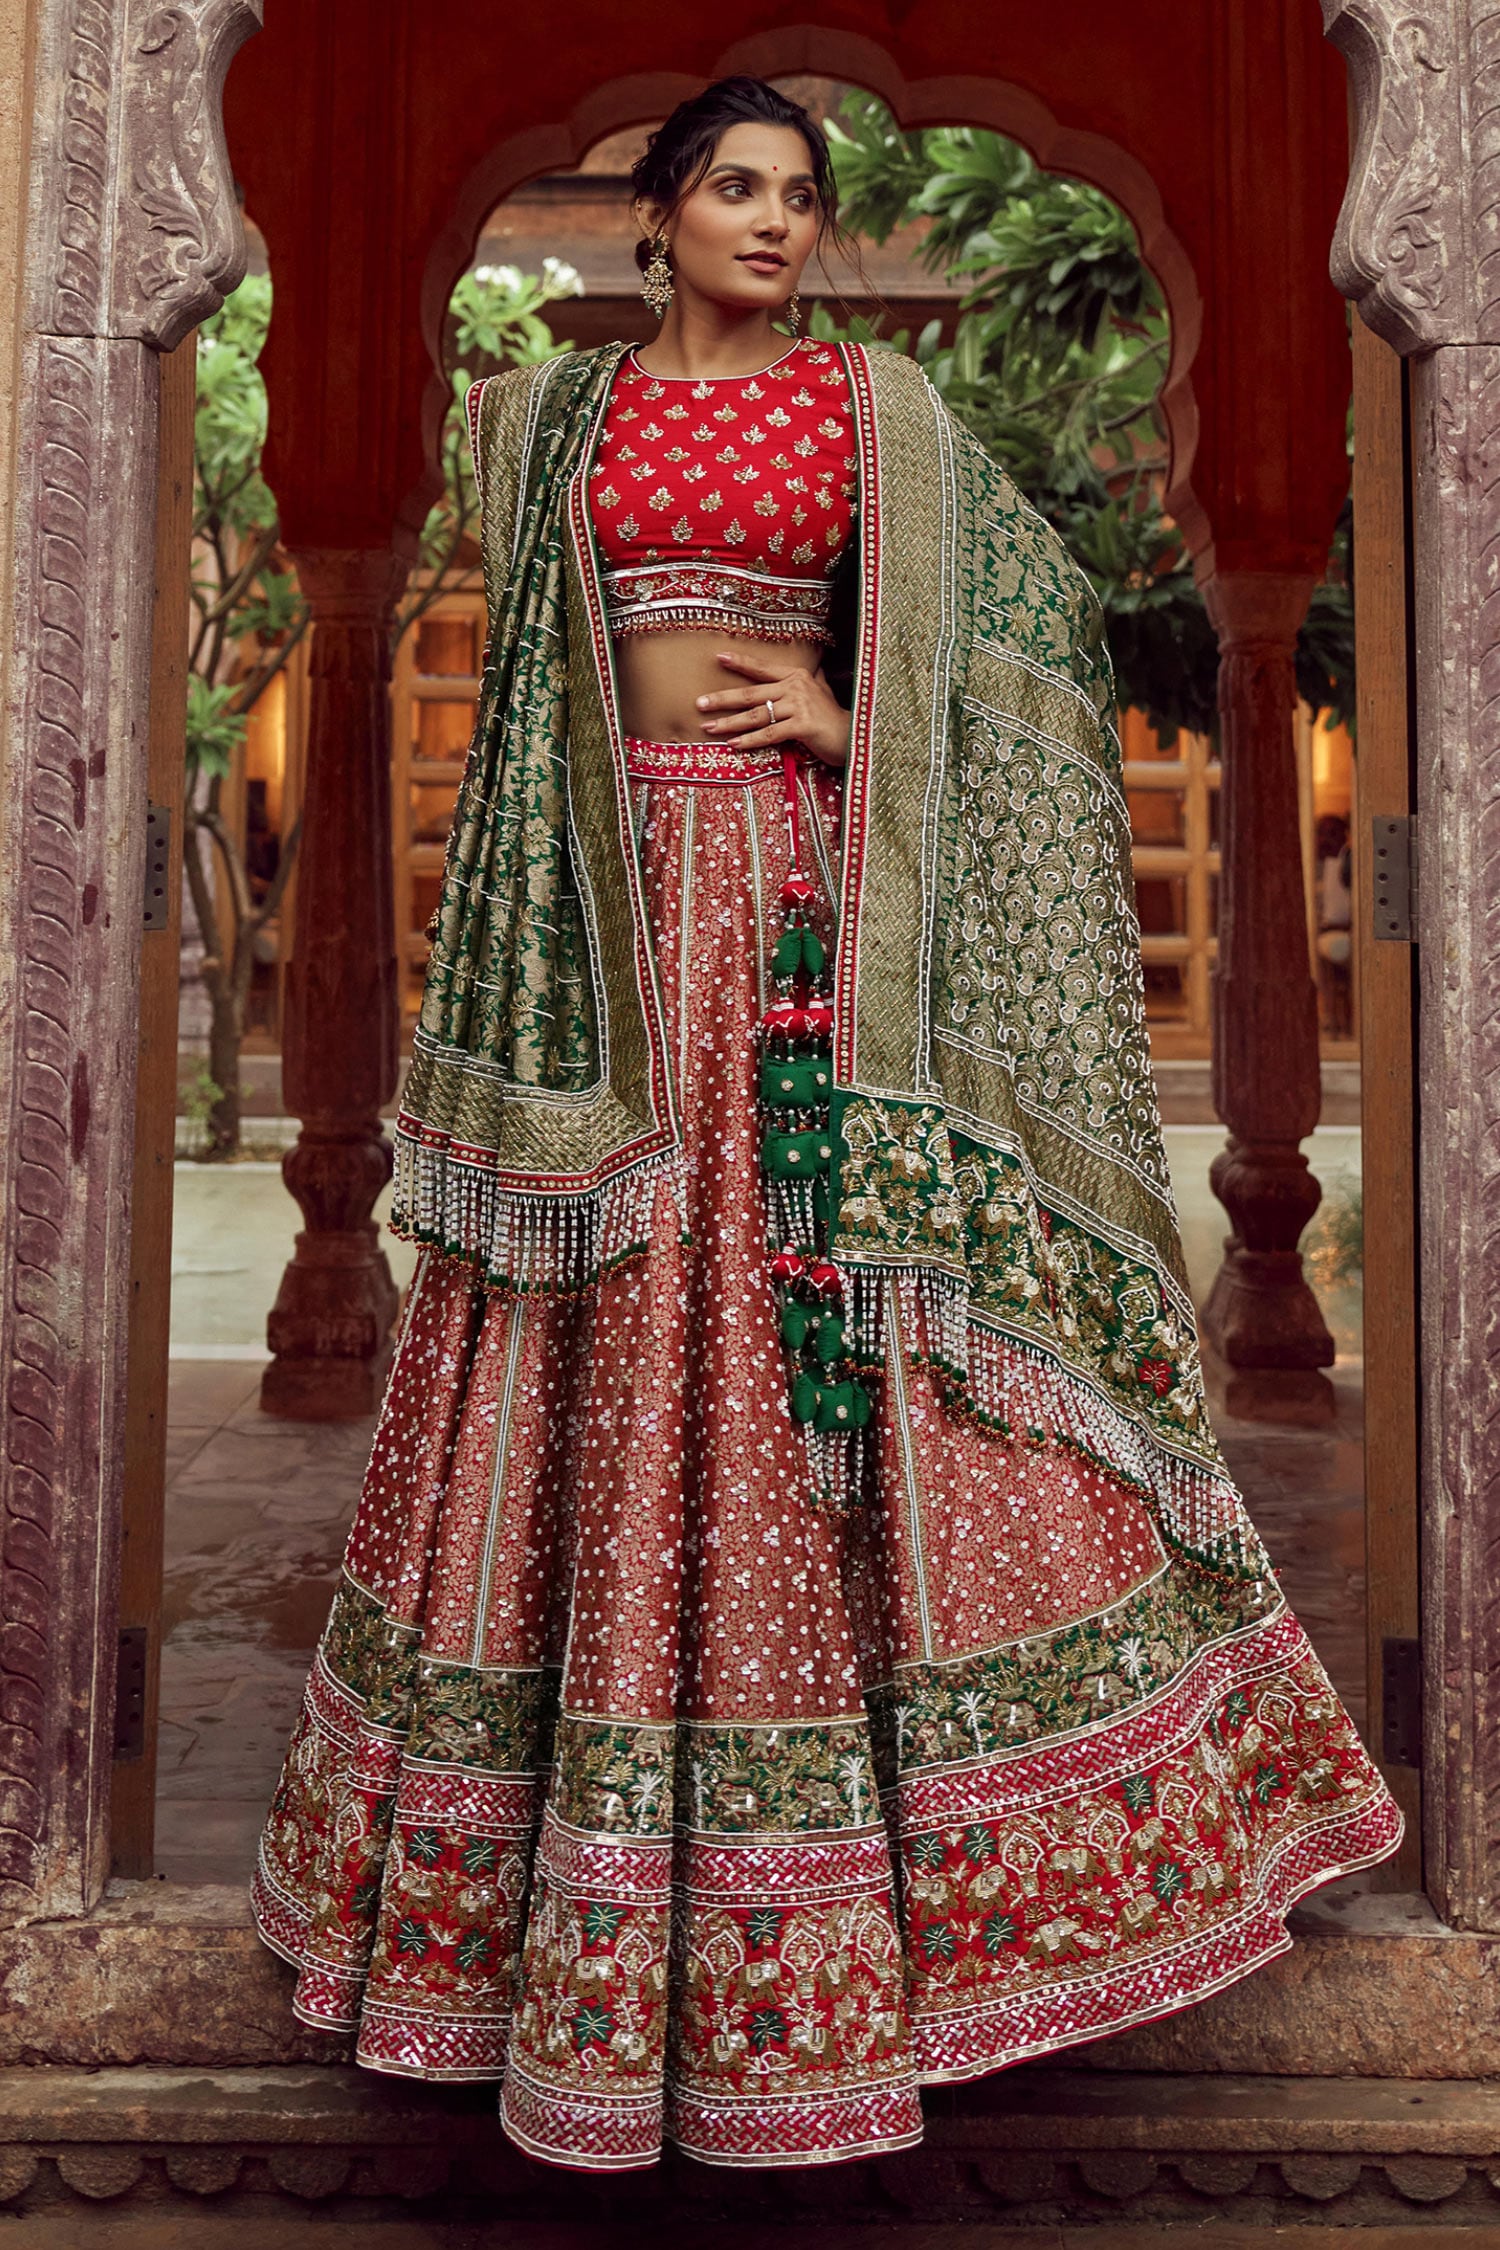 Deep Red Traditional Bridal Lehenga Set with Gold Embroidery and Matching  Dupatta - Seasons India